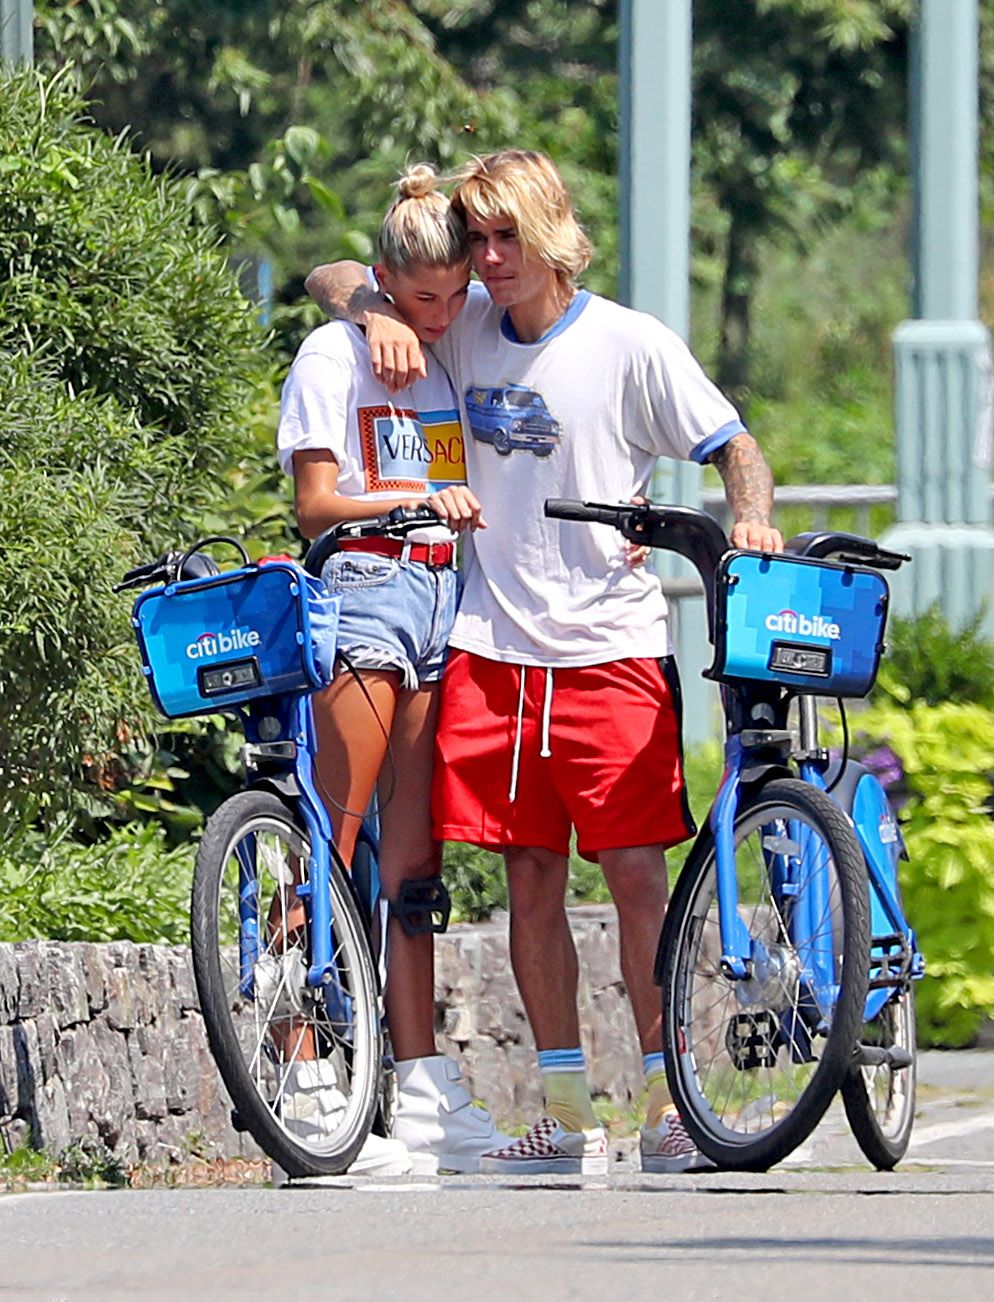 Justin Bieber and Hailey Baldwin Cried While Riding Their Bikes Today